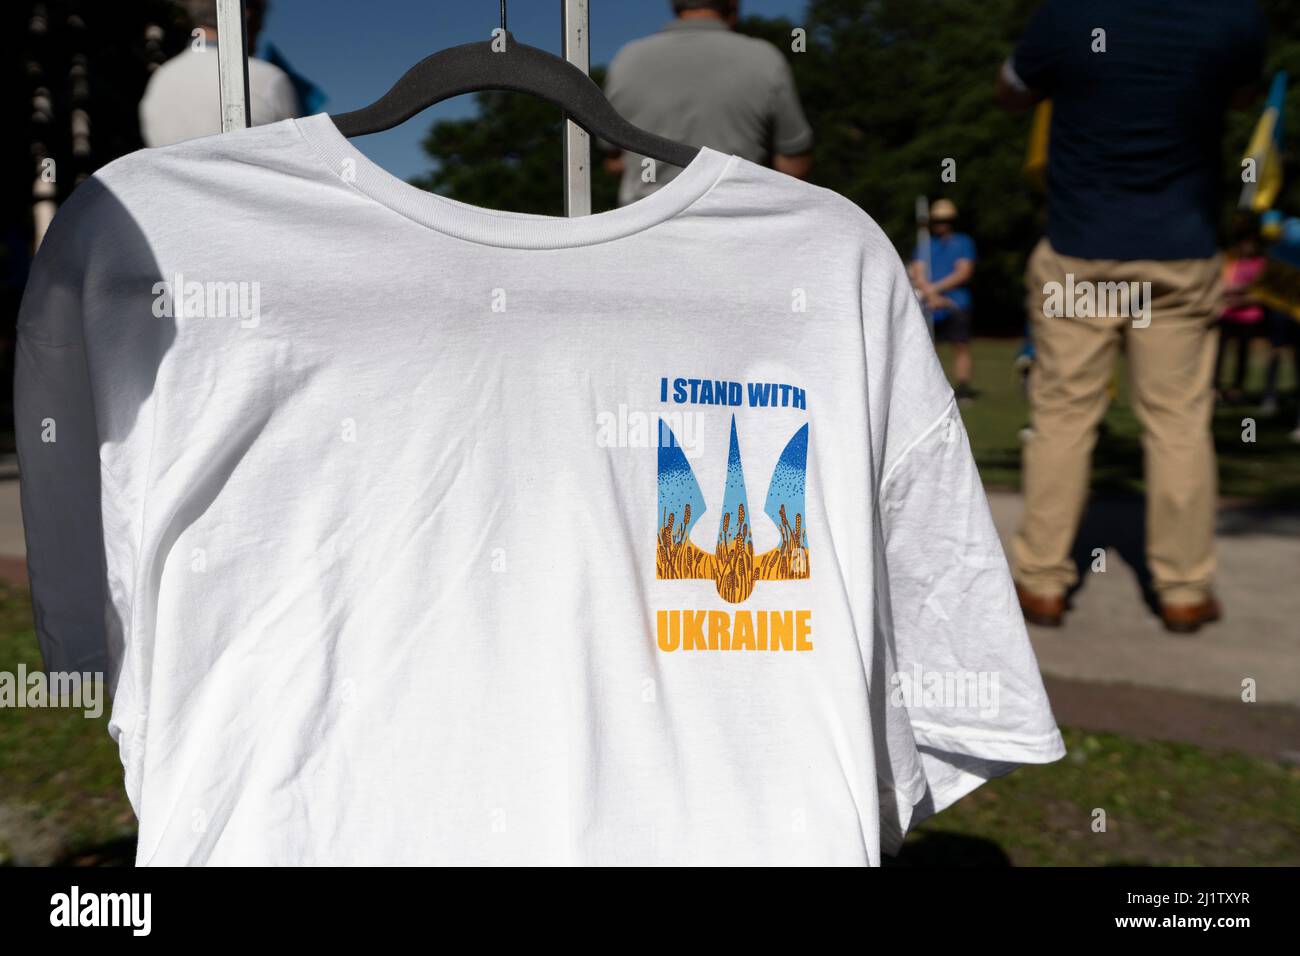 Orlando, Florida, USA. 24th Mar, 2022. A pro Ukrainian t-shirt seen during a rally in downtown Orlando. Russia invaded Ukraine on 24 February 2022, triggering the largest military attack in Europe since the World War II. Up to 10 million Ukrainians have fled their homes, either leaving the country or moving to safer areas within Ukraine.Some 3 million refugees are thought to have crossed the borders into neighboring countries. (Credit Image: © Ronen Tivony/SOPA Images via ZUMA Press Wire) Stock Photo